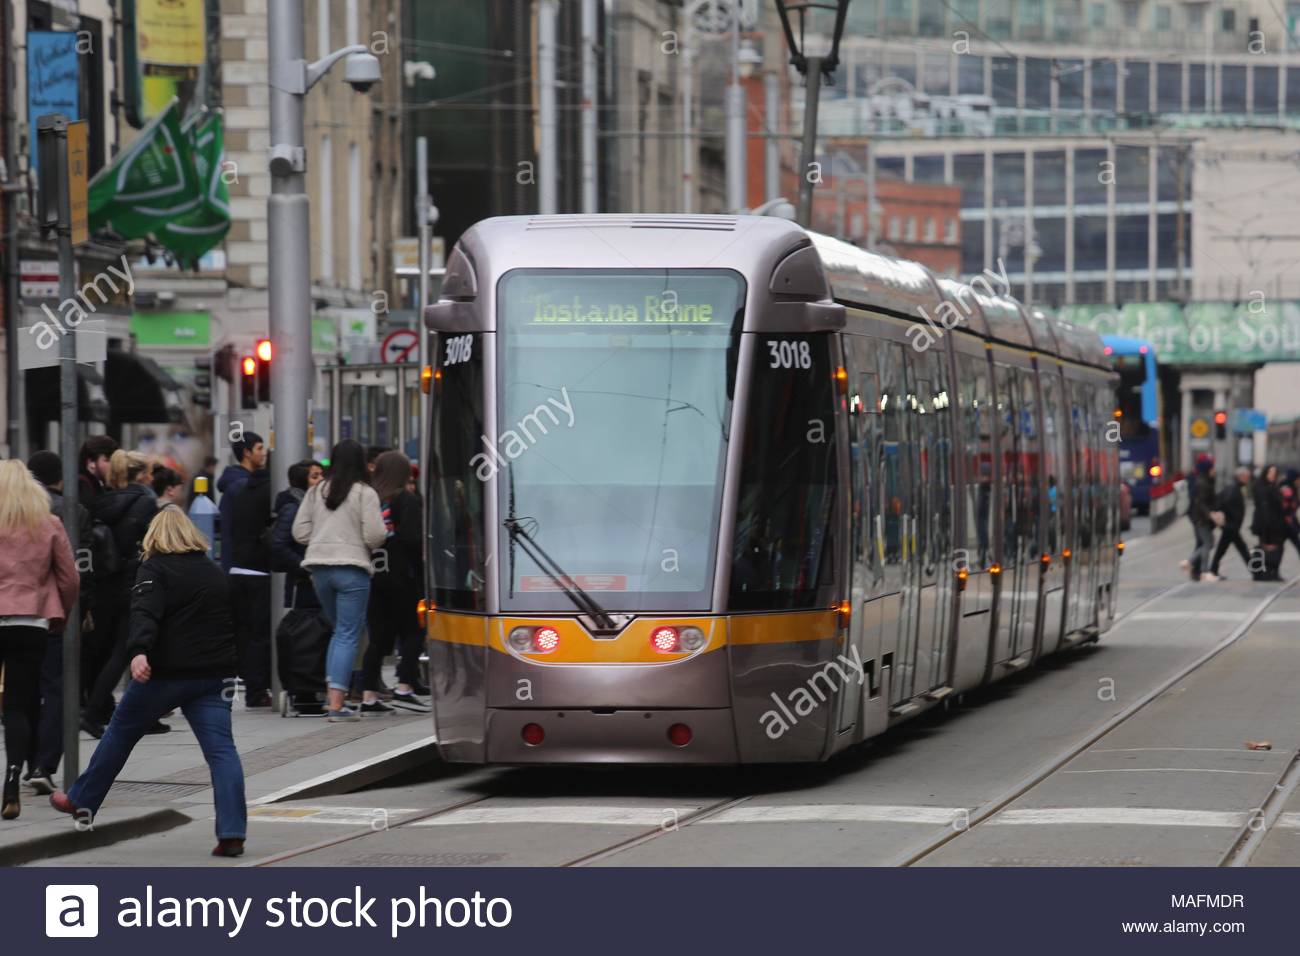 A Luas tram in downtown Dublin as the city expands its commuter links and introduces a modern transport system befitting  a European capital. Stock Photo